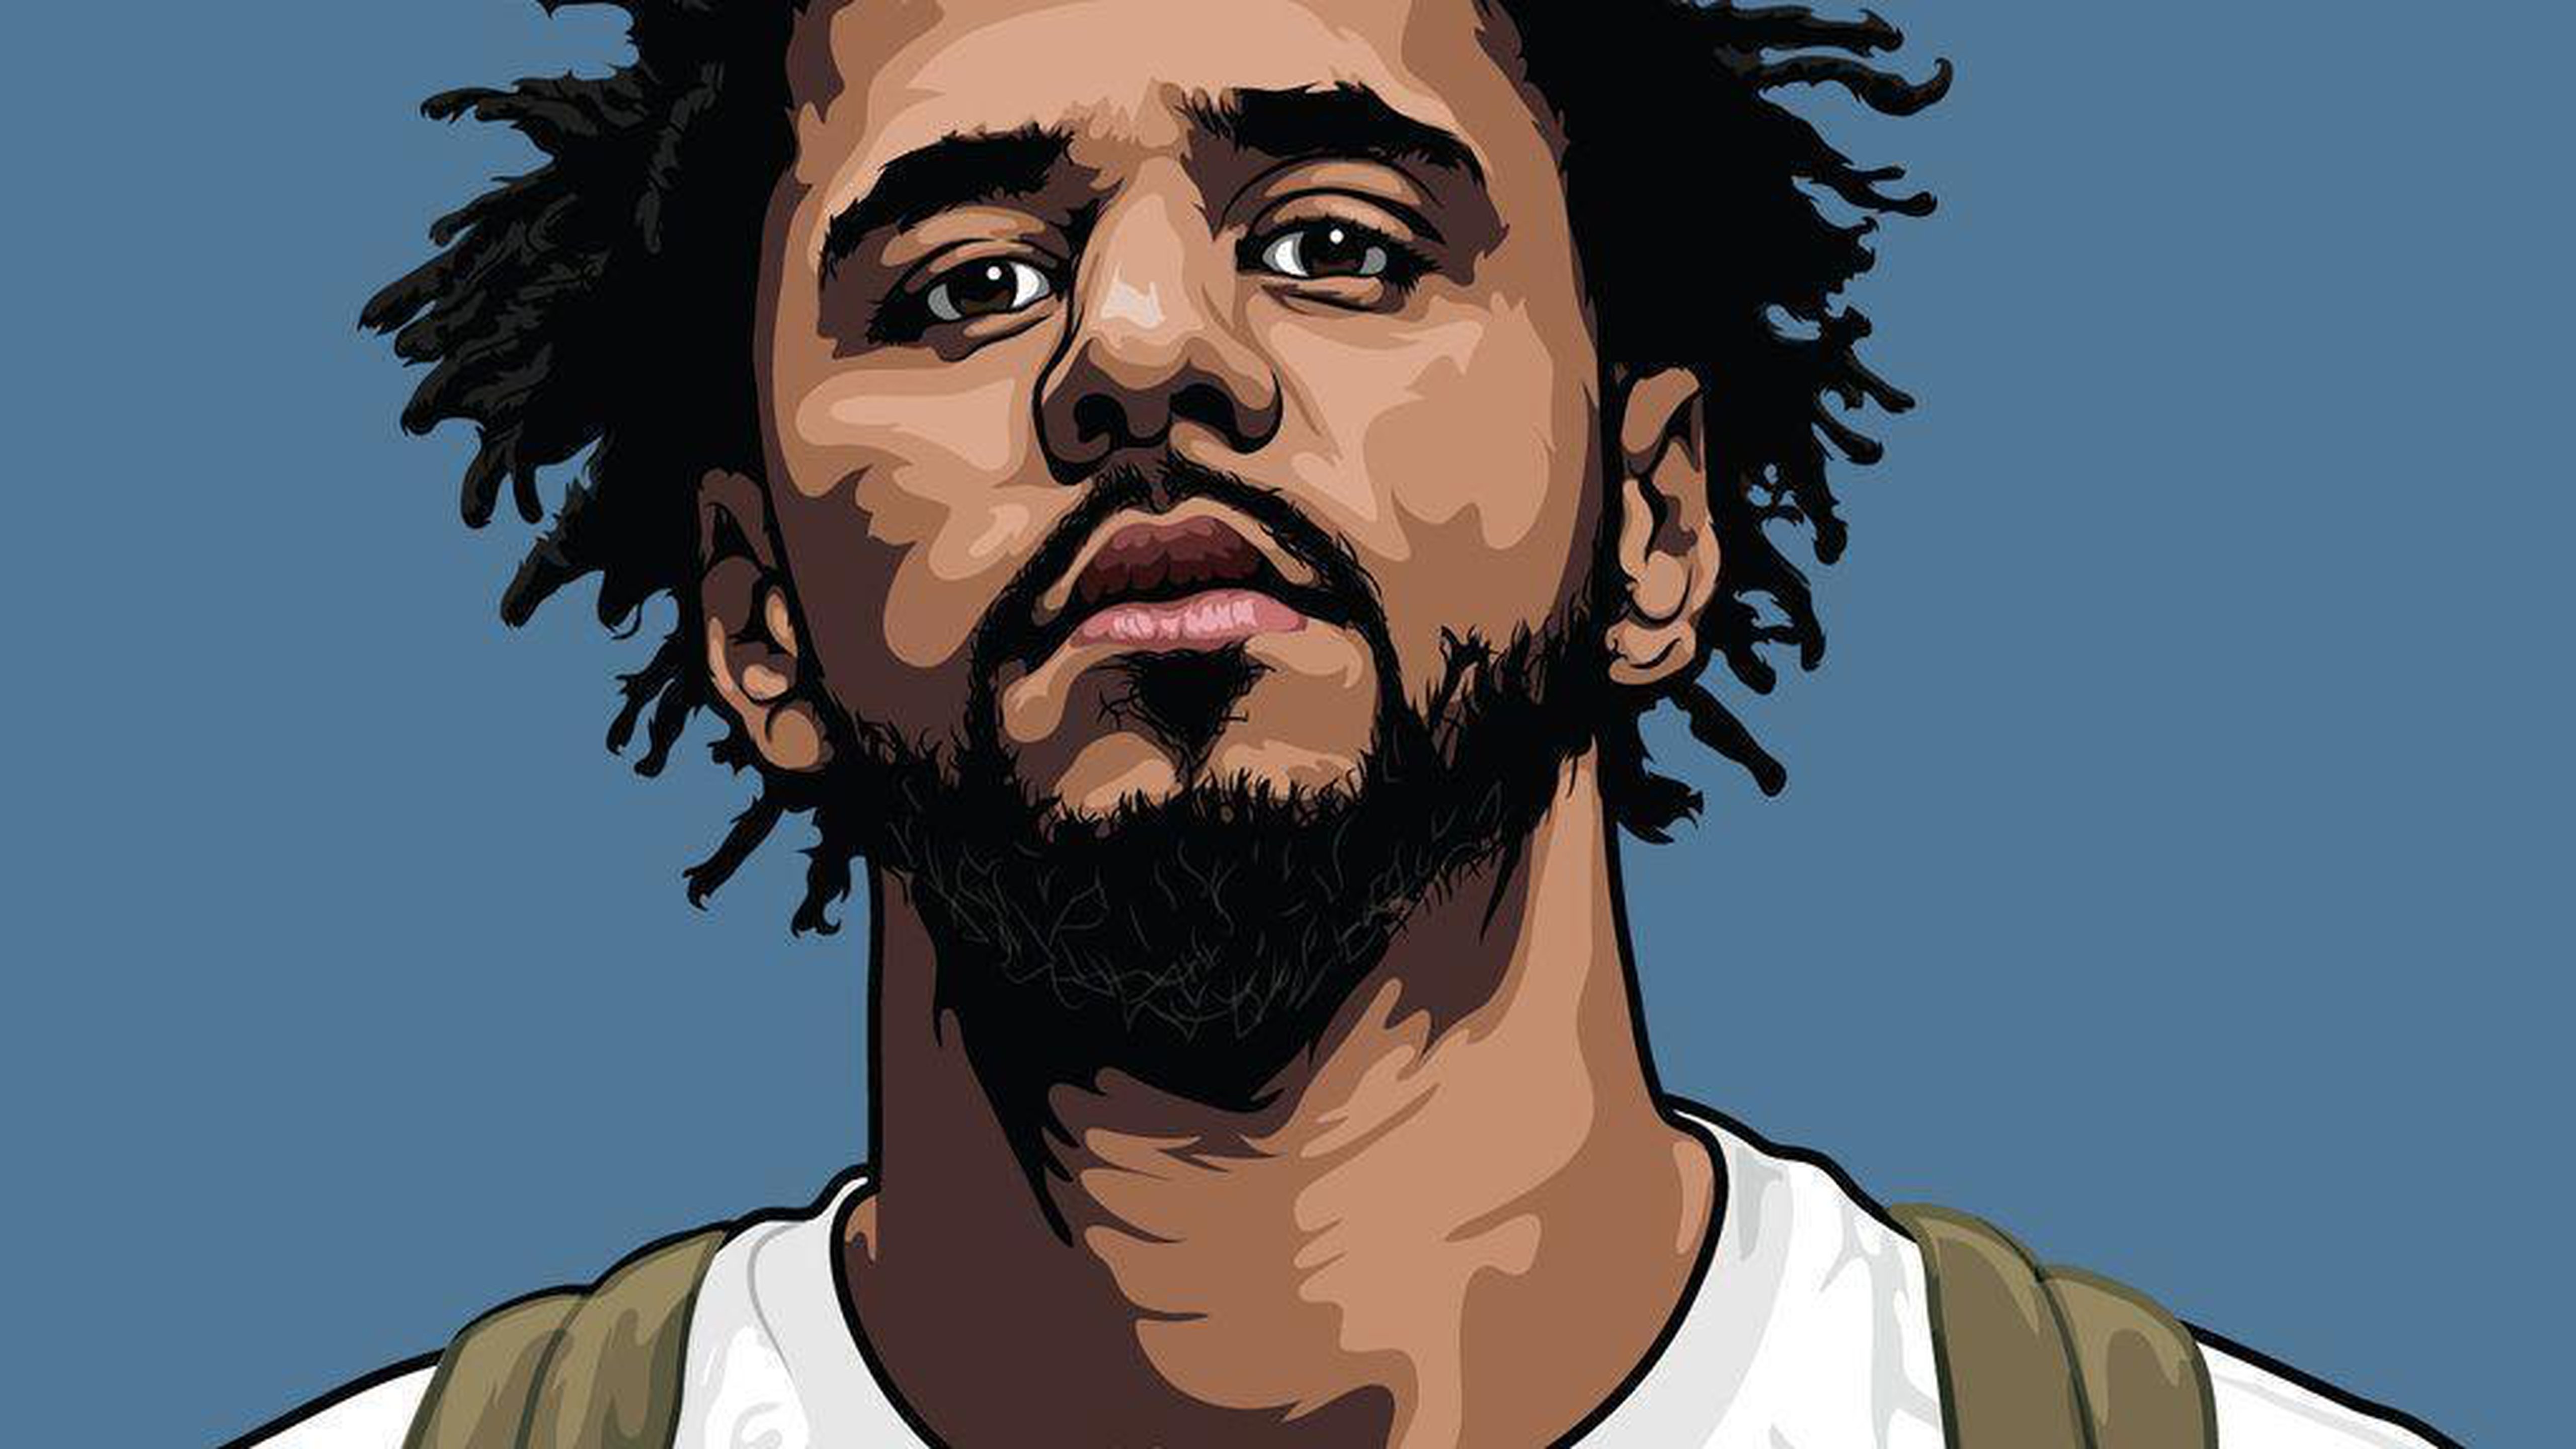 Download J. Cole HD Pictures, Ultra HD Images, And 4k Desktop Wallpapers Here5120 x 2880